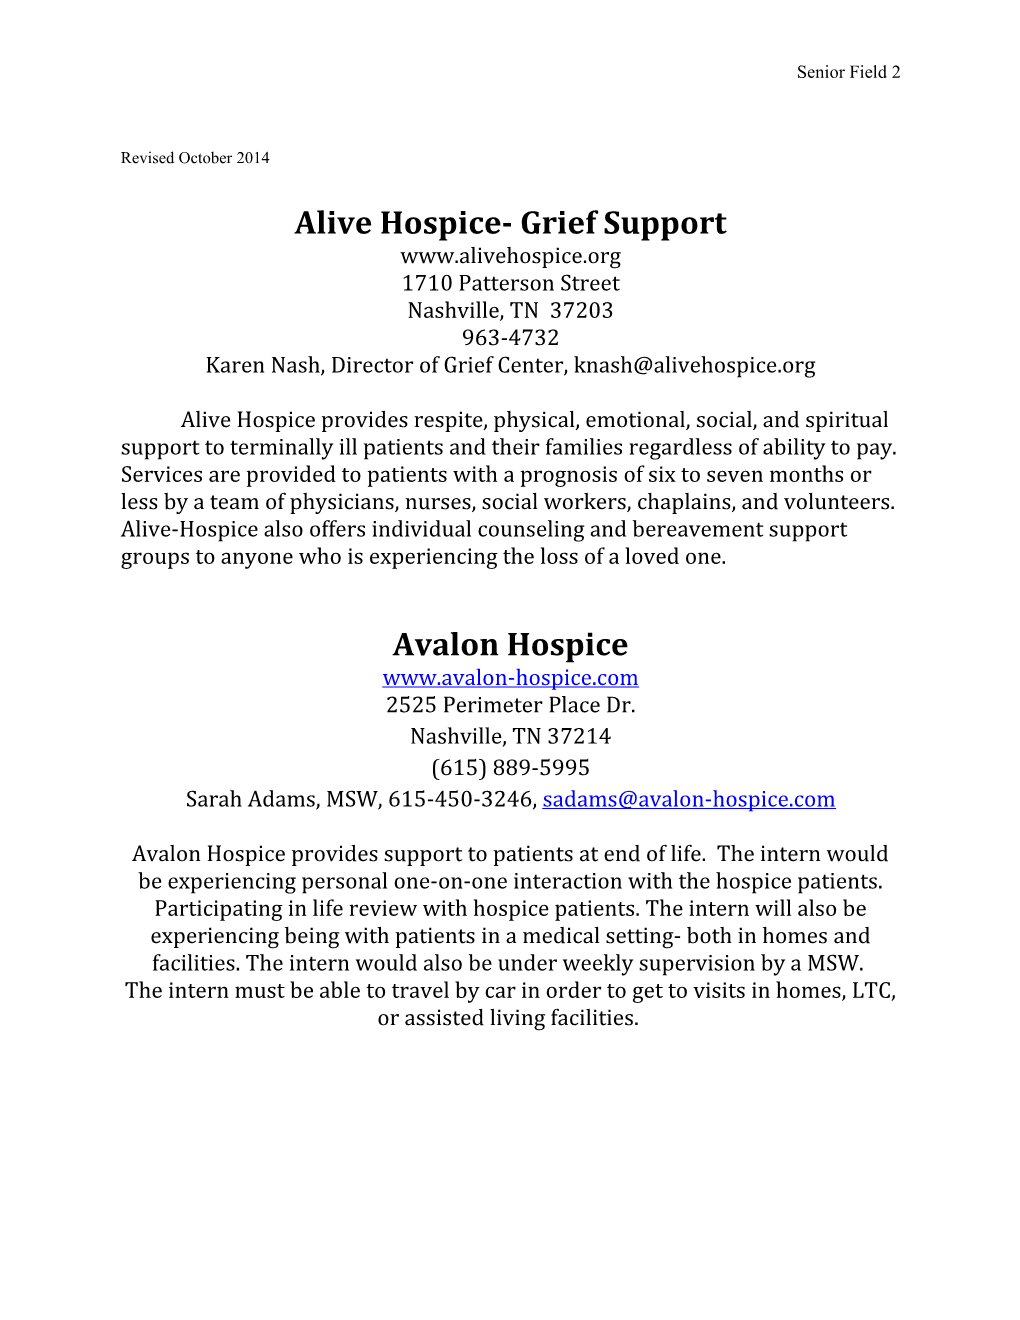 Alive Hospice- Grief Support